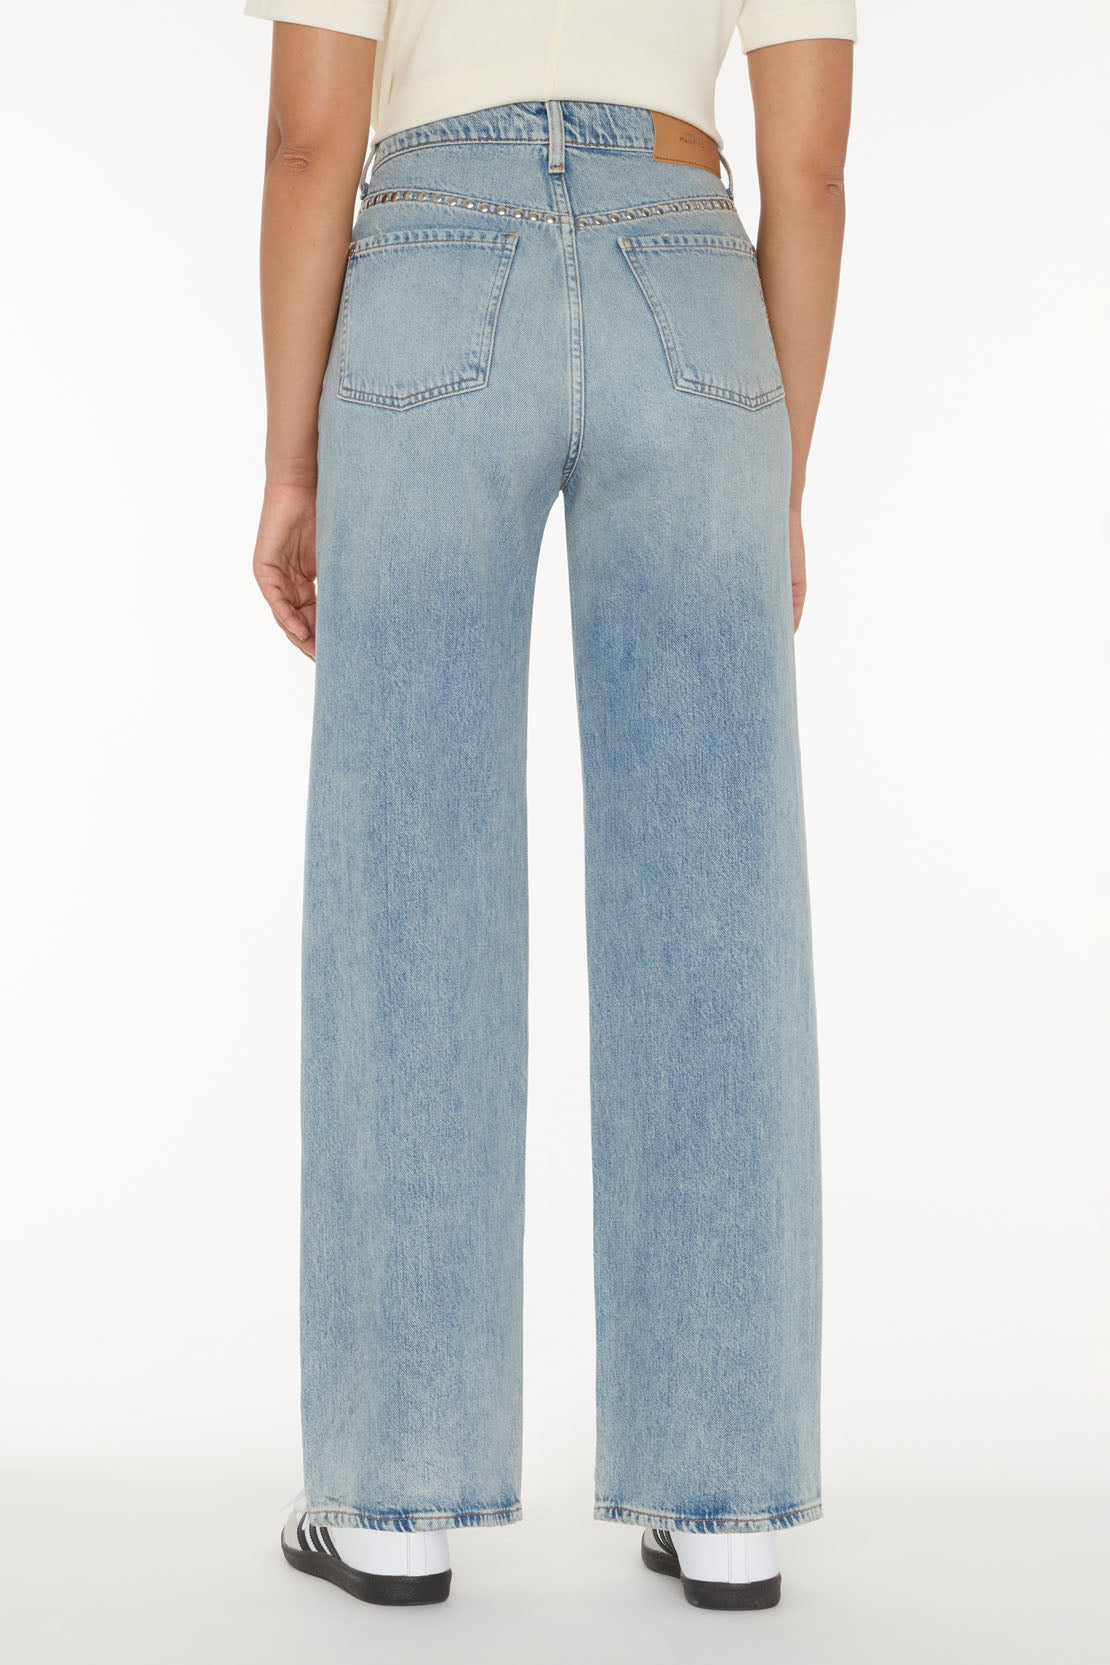 7 For All Mankind Tess Jean